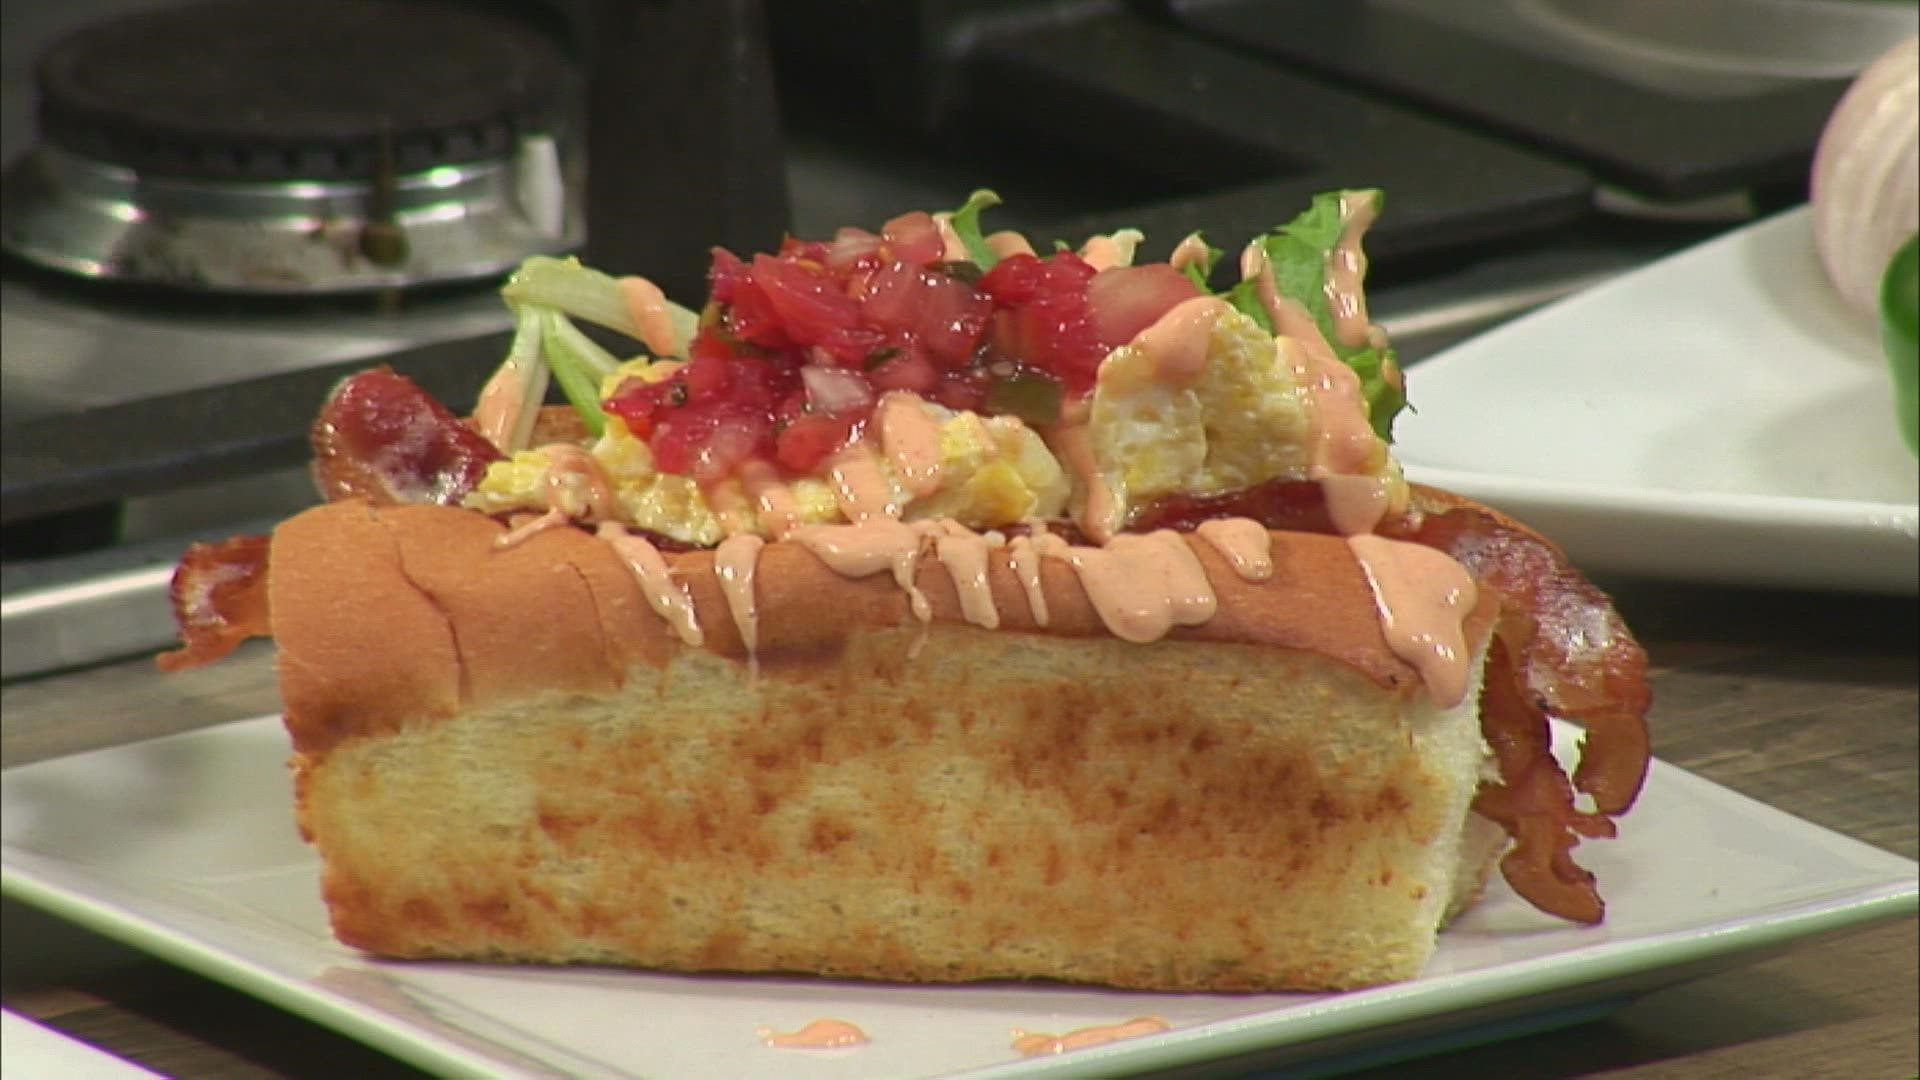 Chef Bo Byrne shows us how to make a breakfast sandwich with a twist.